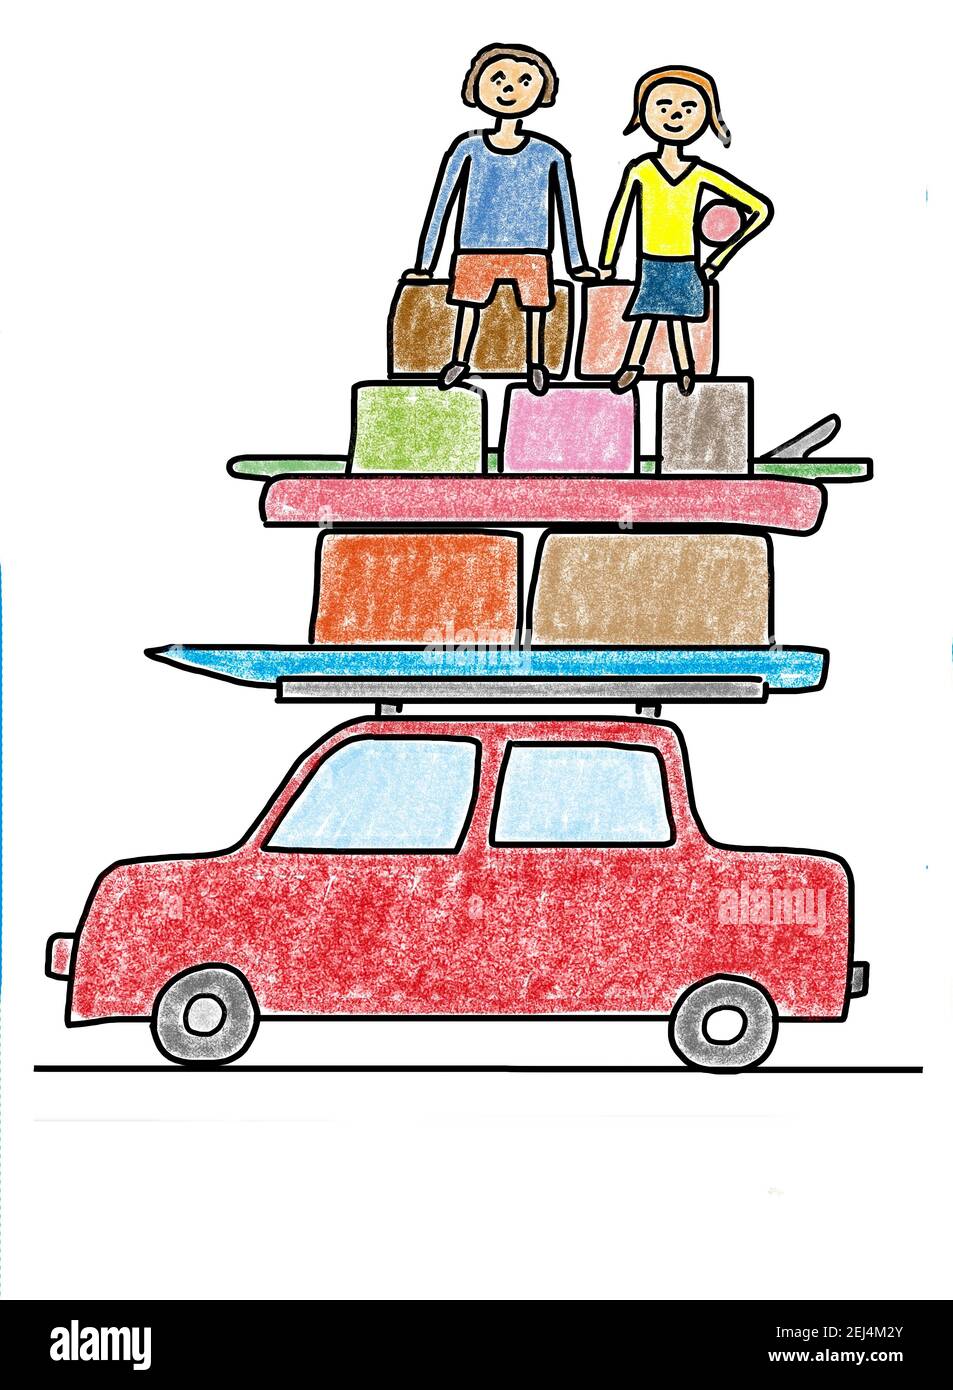 https://c8.alamy.com/comp/2EJ4M2Y/naive-illustration-children-drawing-fully-packed-car-with-children-in-front-of-going-on-vacation-2EJ4M2Y.jpg